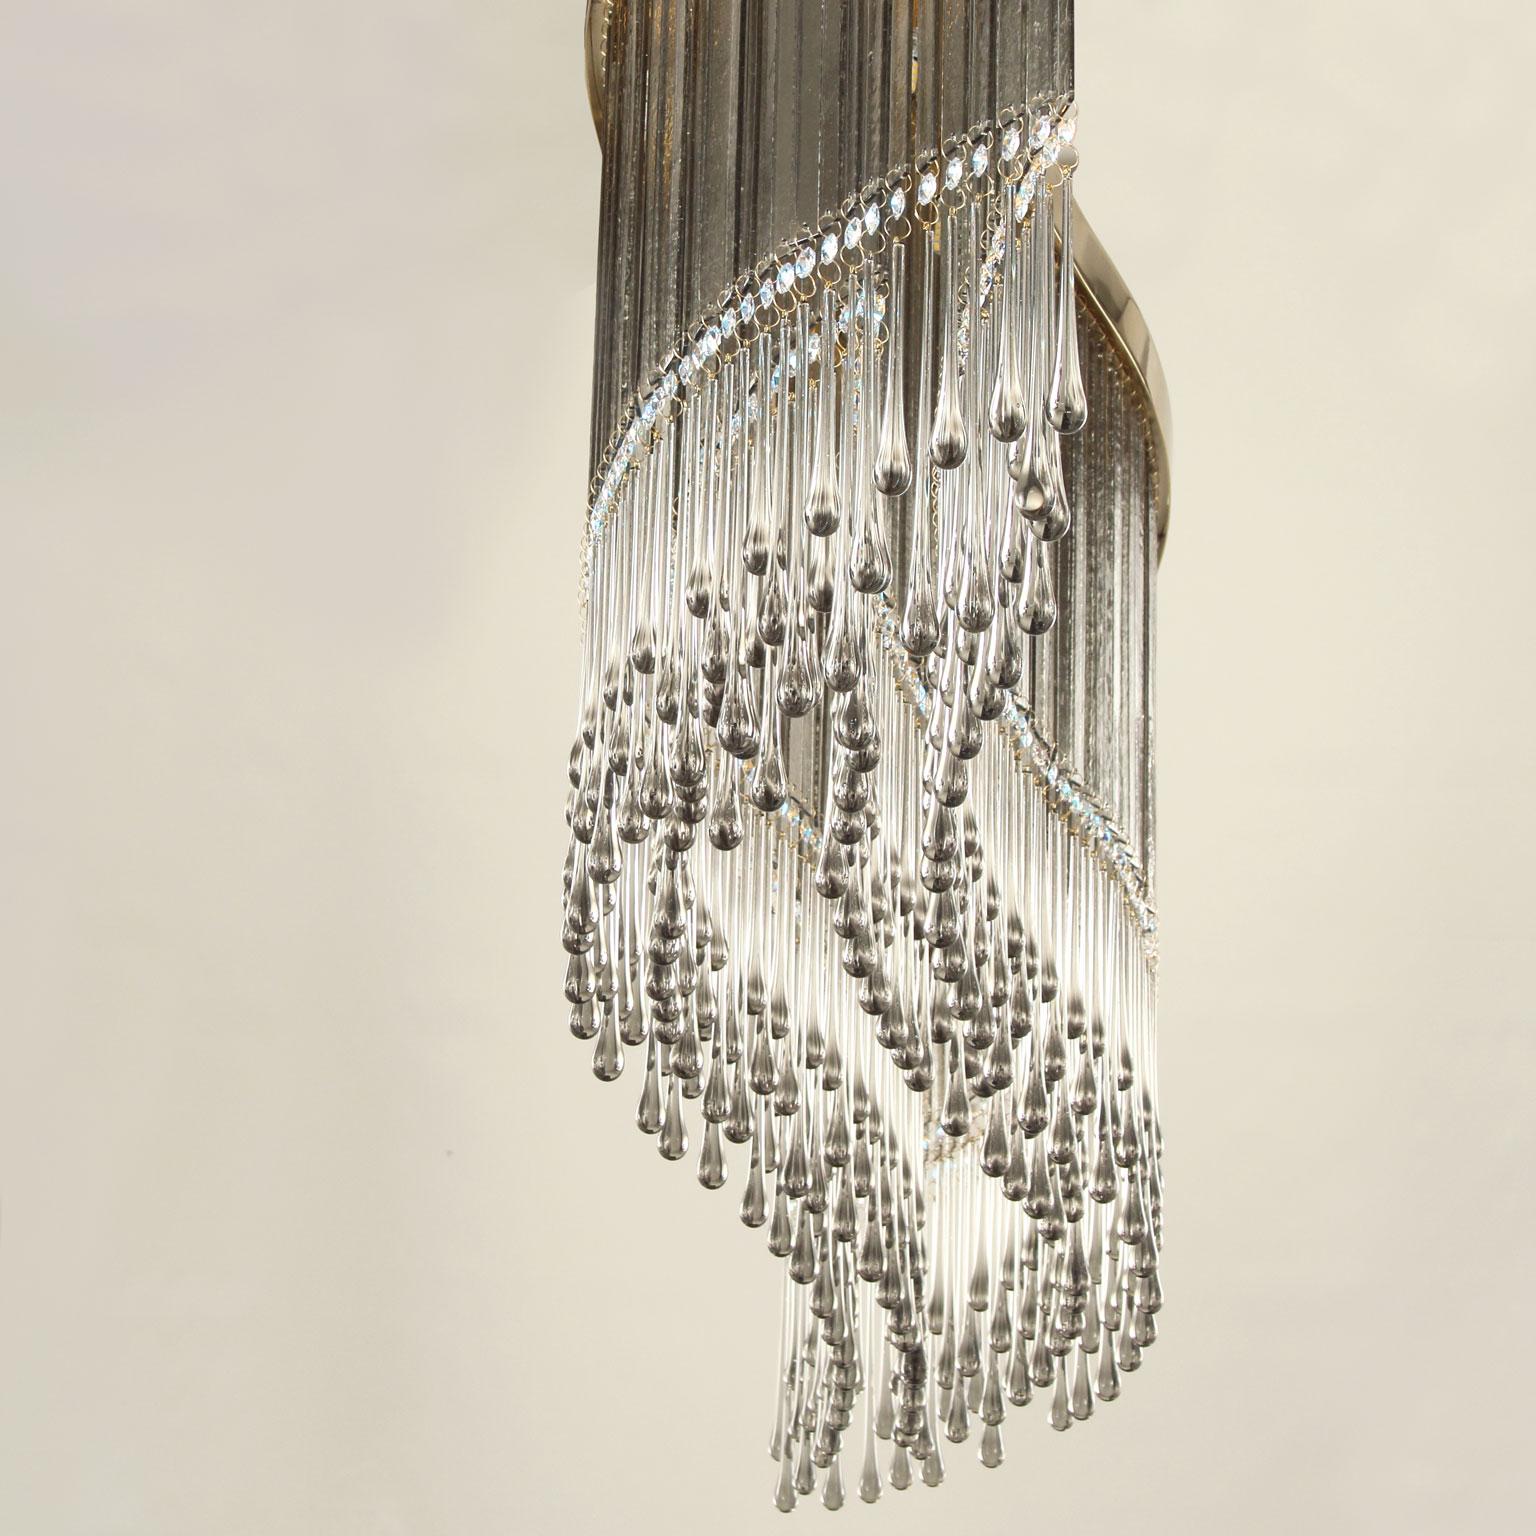 Dancer suspension lamp with grey Murano glass and cut crystal  elements by Multiforme.

The Dancer design lamp is our interpretation of the traditional crystal and glass chandeliers. The whole structure of this suspension lamp is composed of a